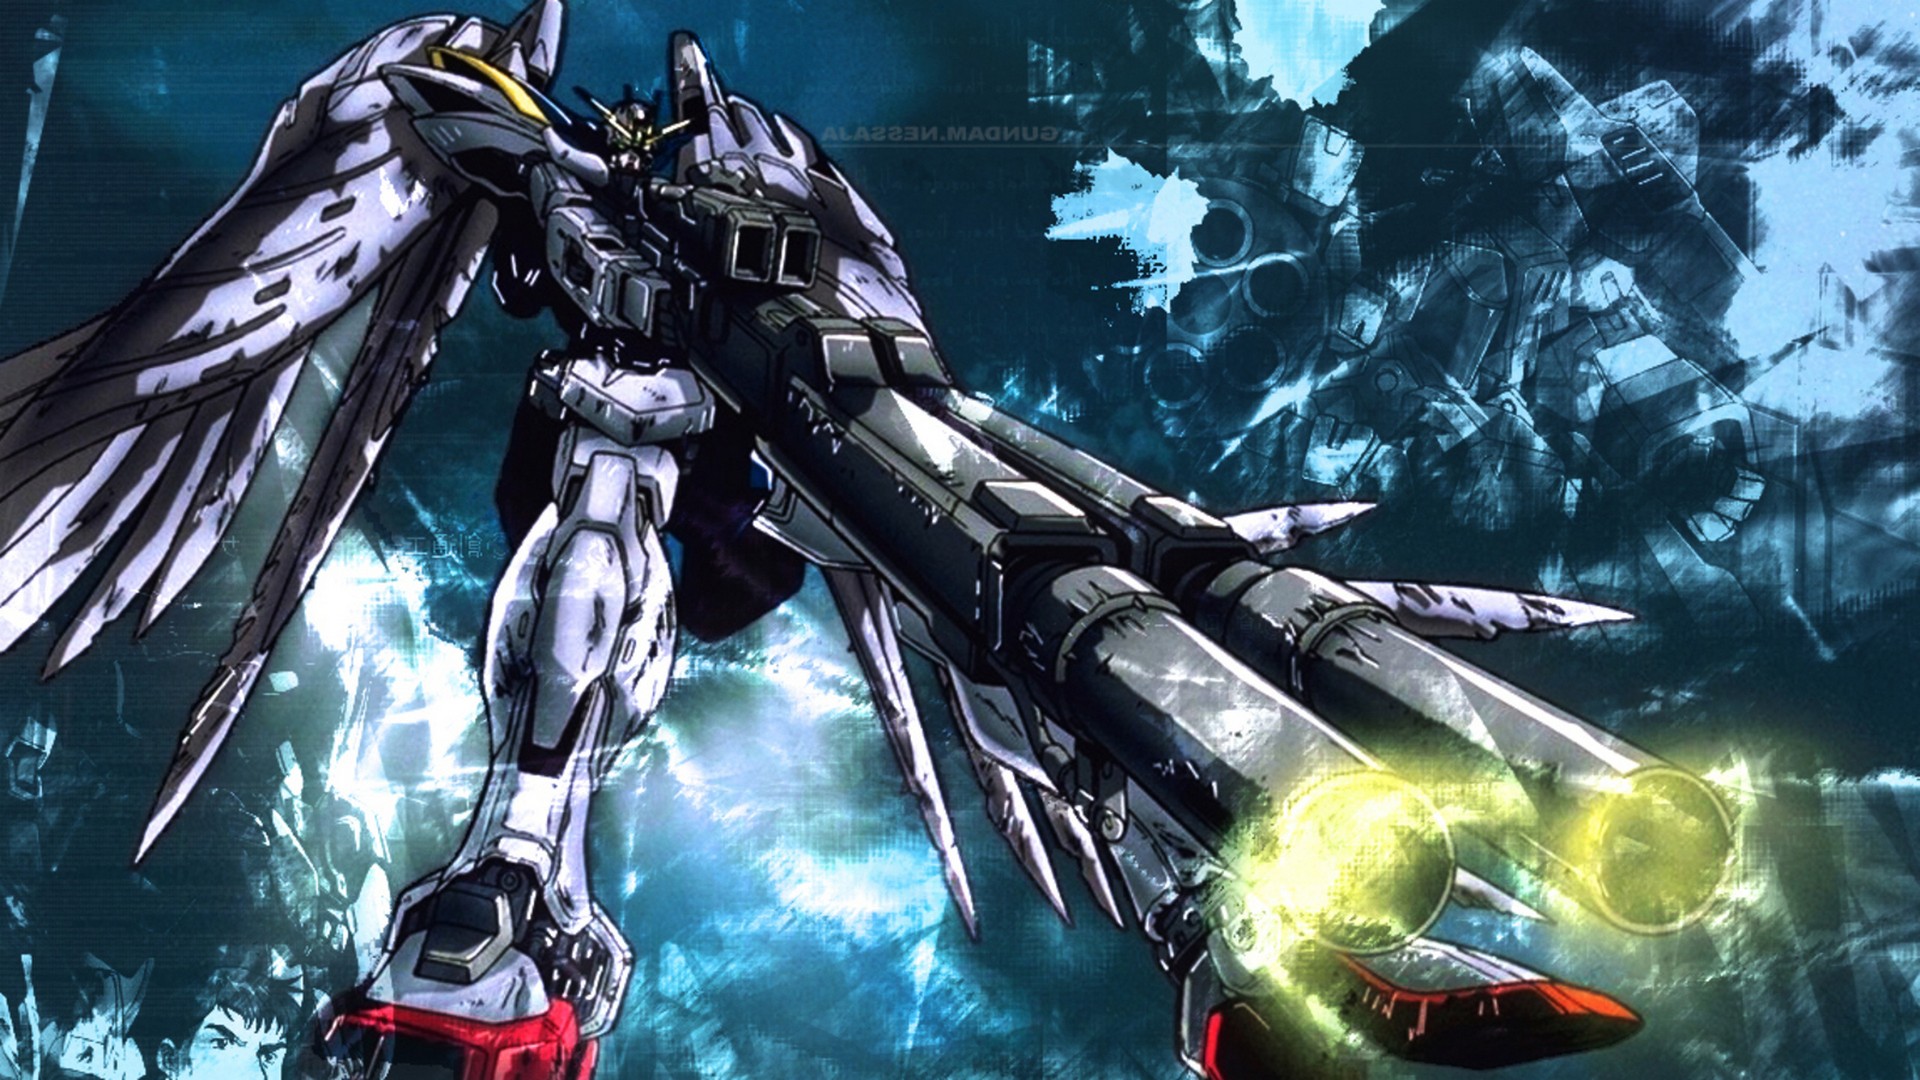 HD Gundam Backgrounds With high-resolution 1920X1080 pixel. You can use this wallpaper for your Windows and Mac OS computers as well as your Android and iPhone smartphones